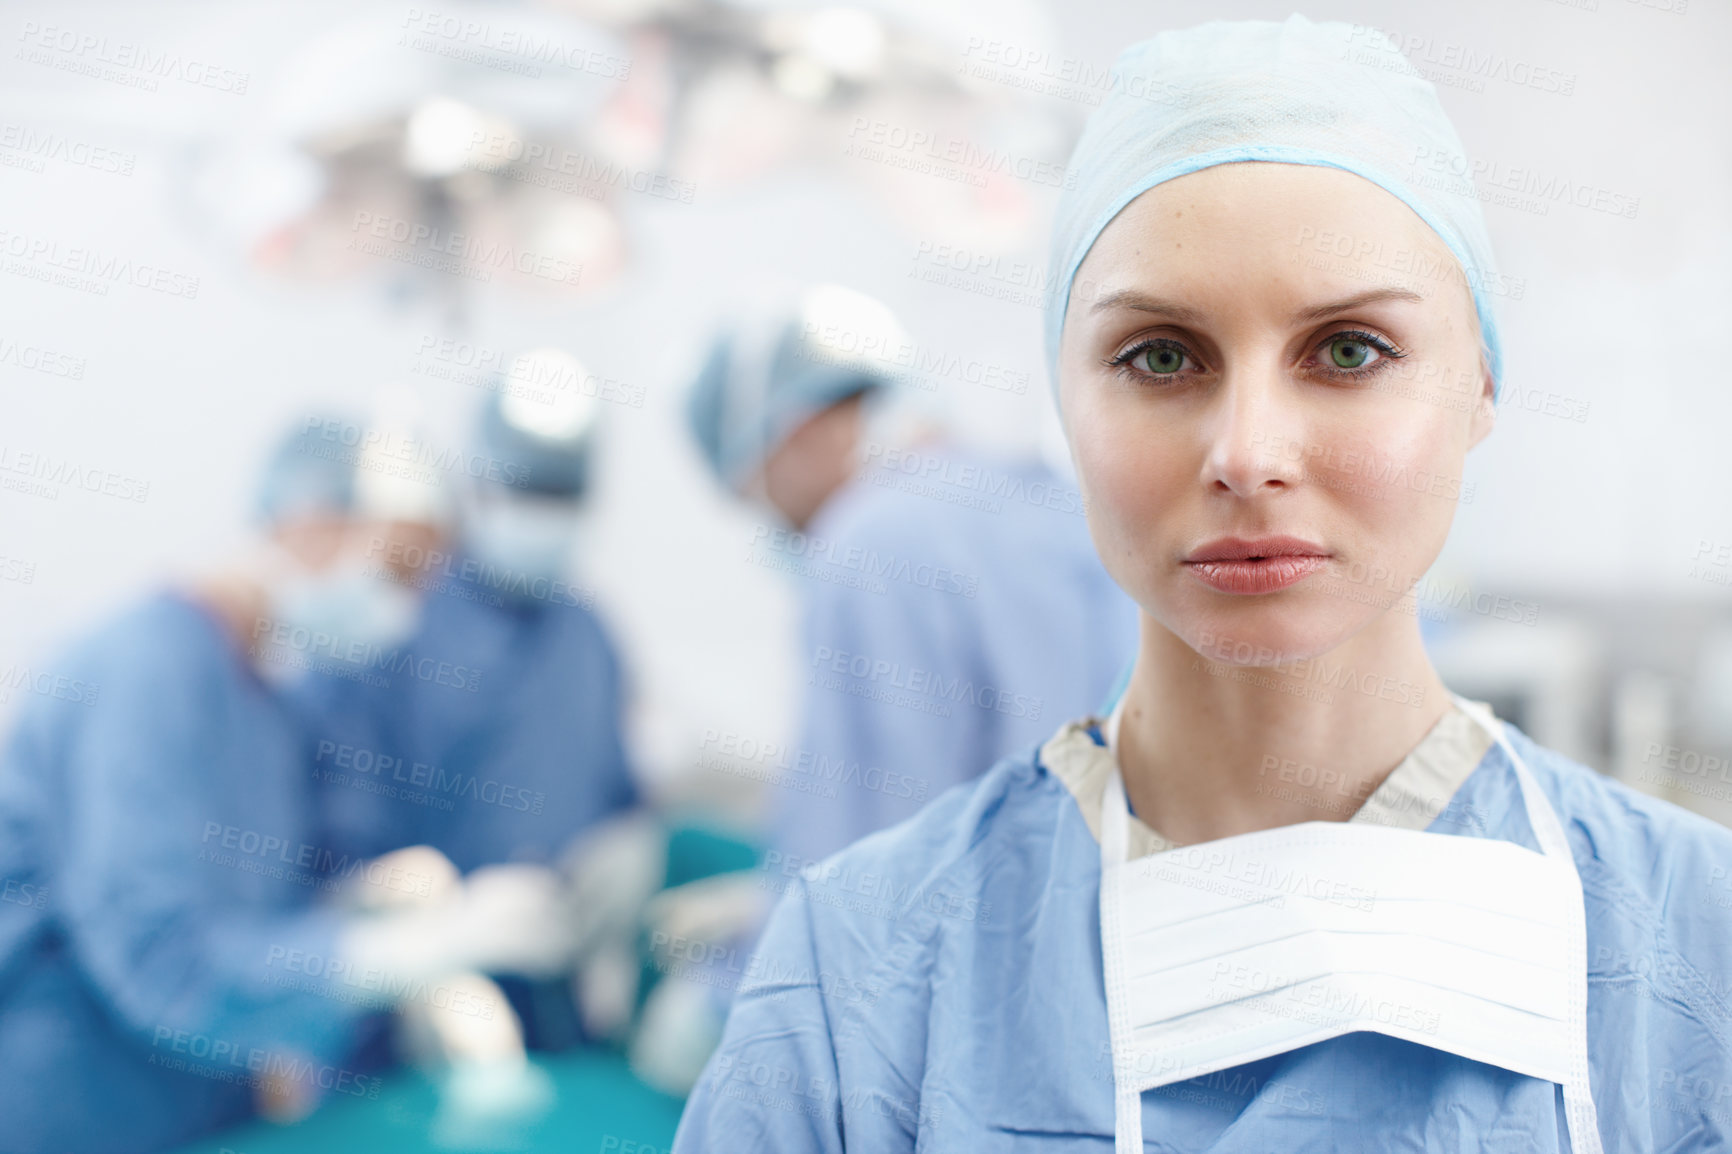 Buy stock photo Closeup portrait of a female surgeon with a serious look on her face - Copyspace